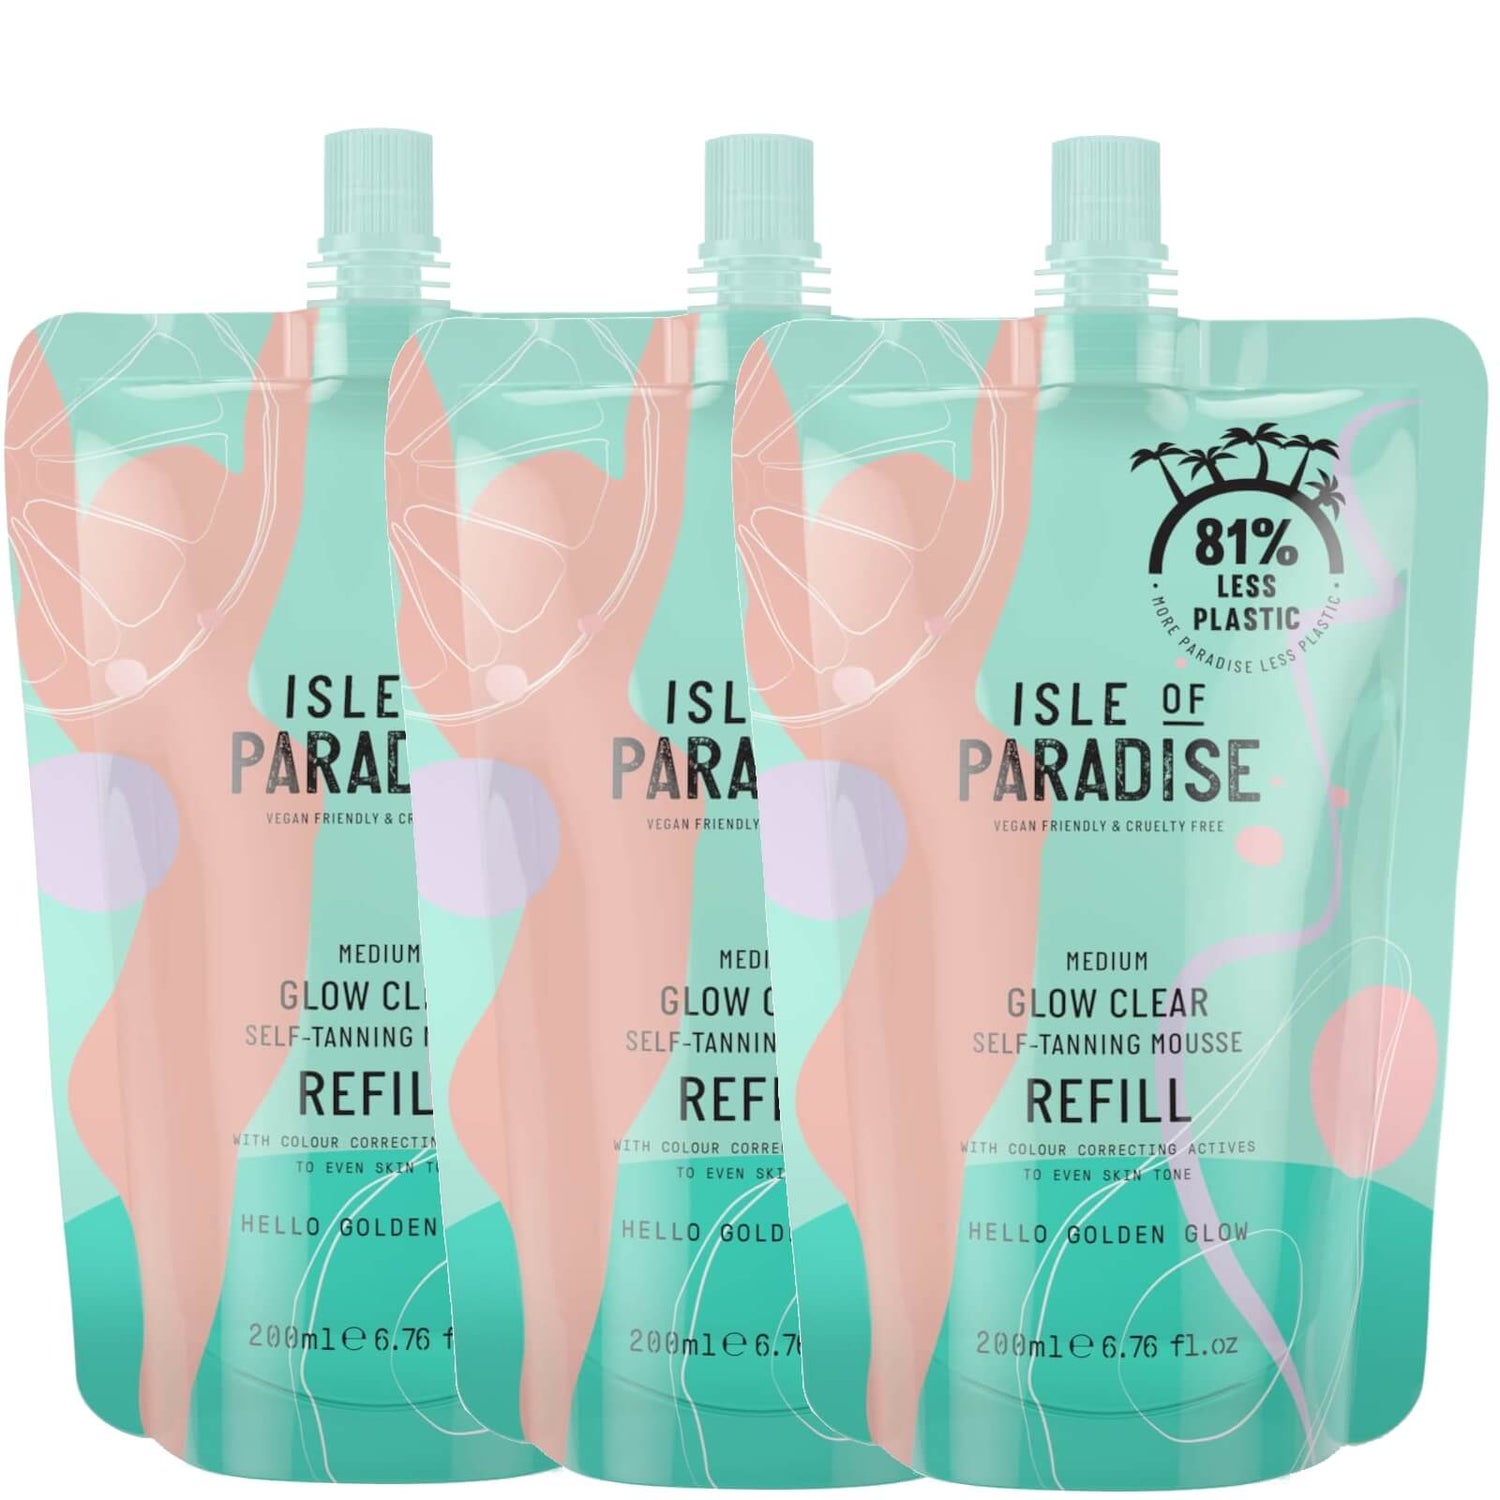 Isle of Paradise Medium Glow Clear Mousse Refill Trio (Worth £47.85)